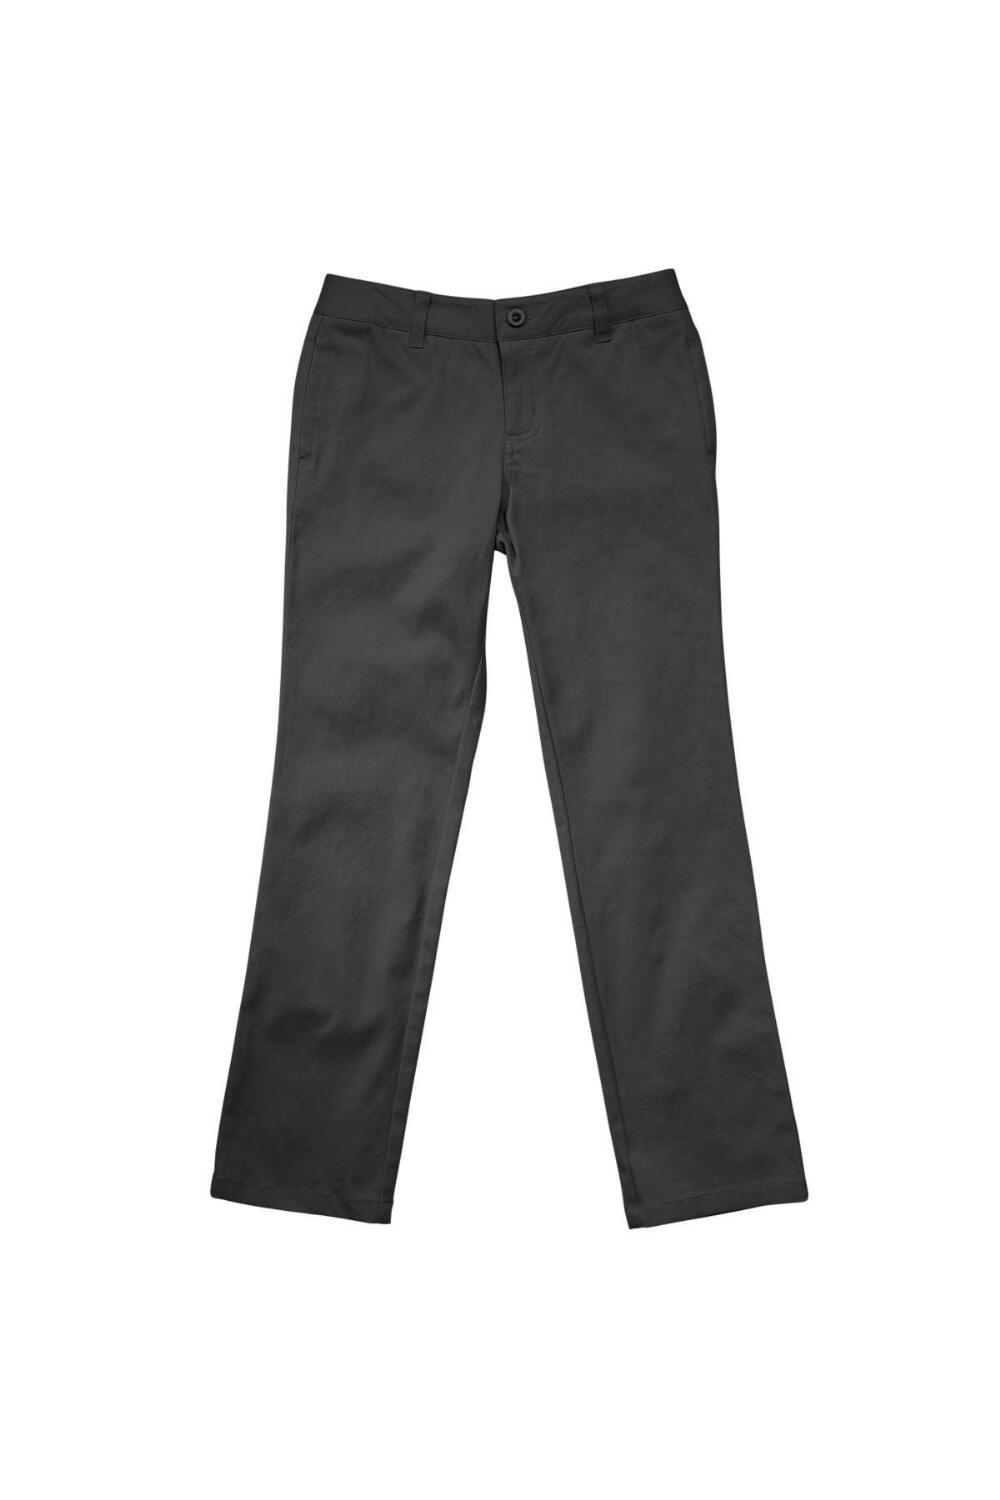 French Toast Girl's Straight Leg Twill Pant (Pant Color: Grey - SWCS, Pant Size: Size 4)